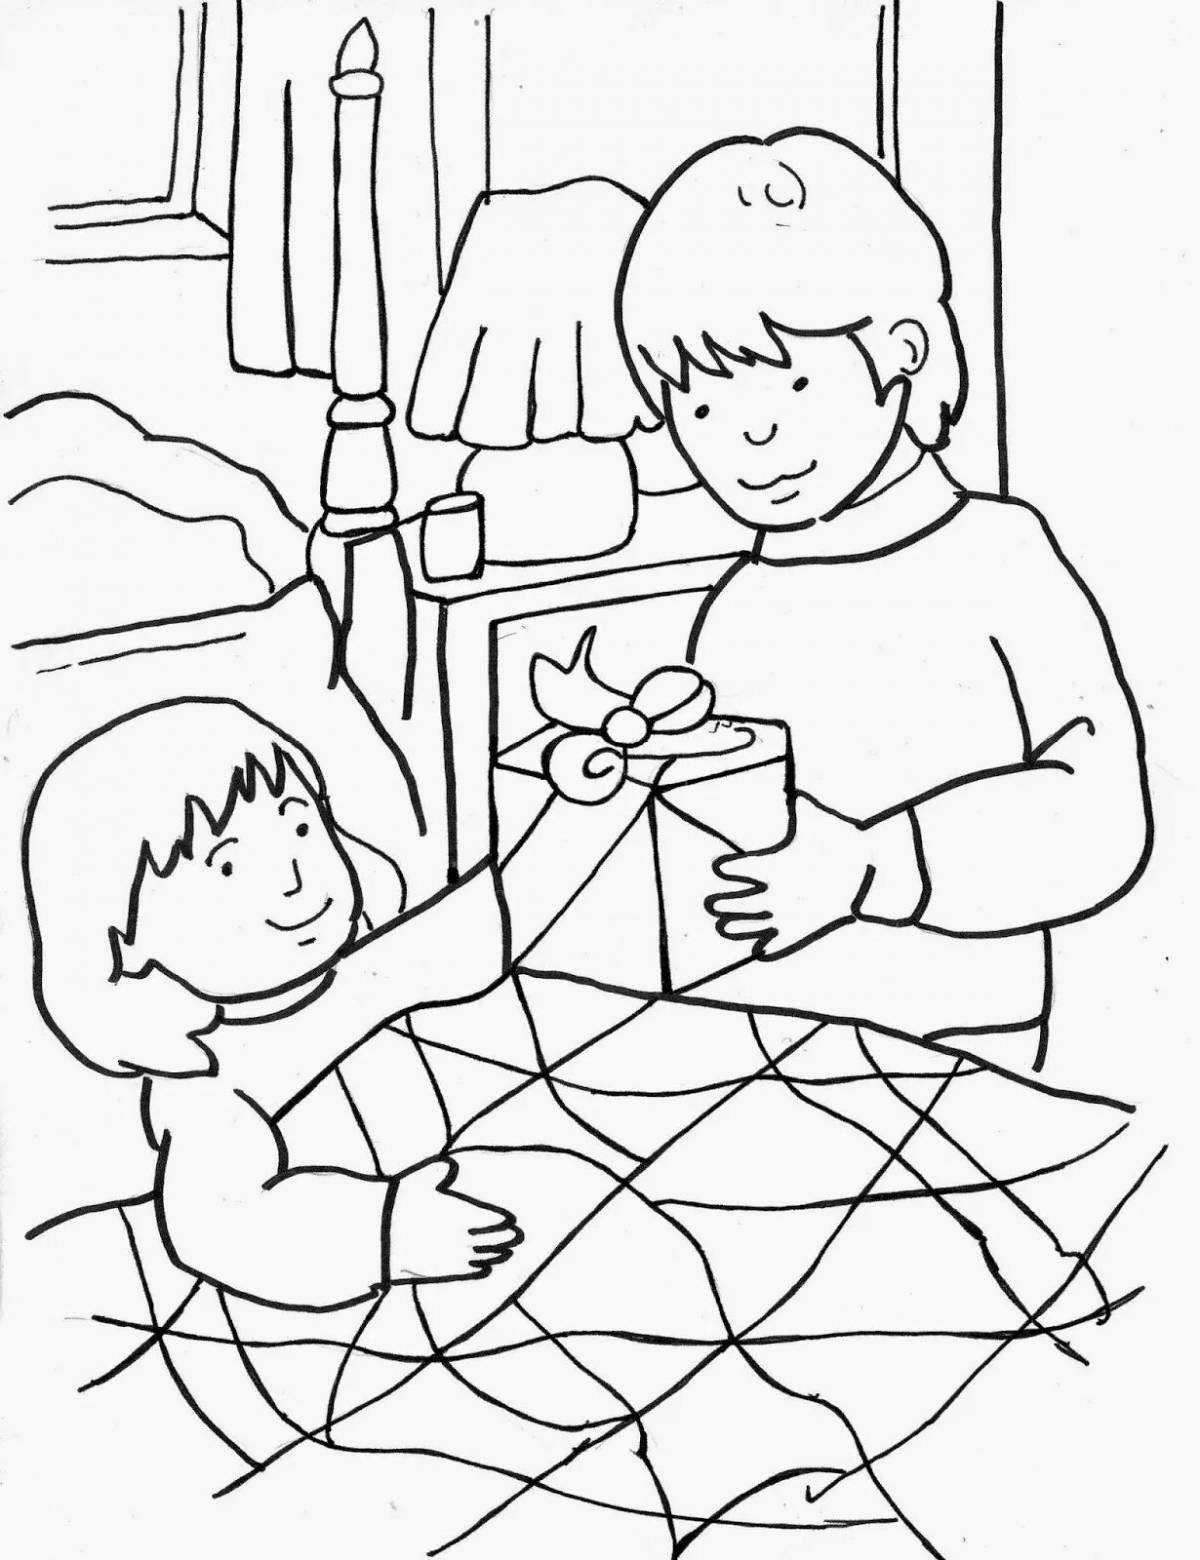 Creative kindness coloring page